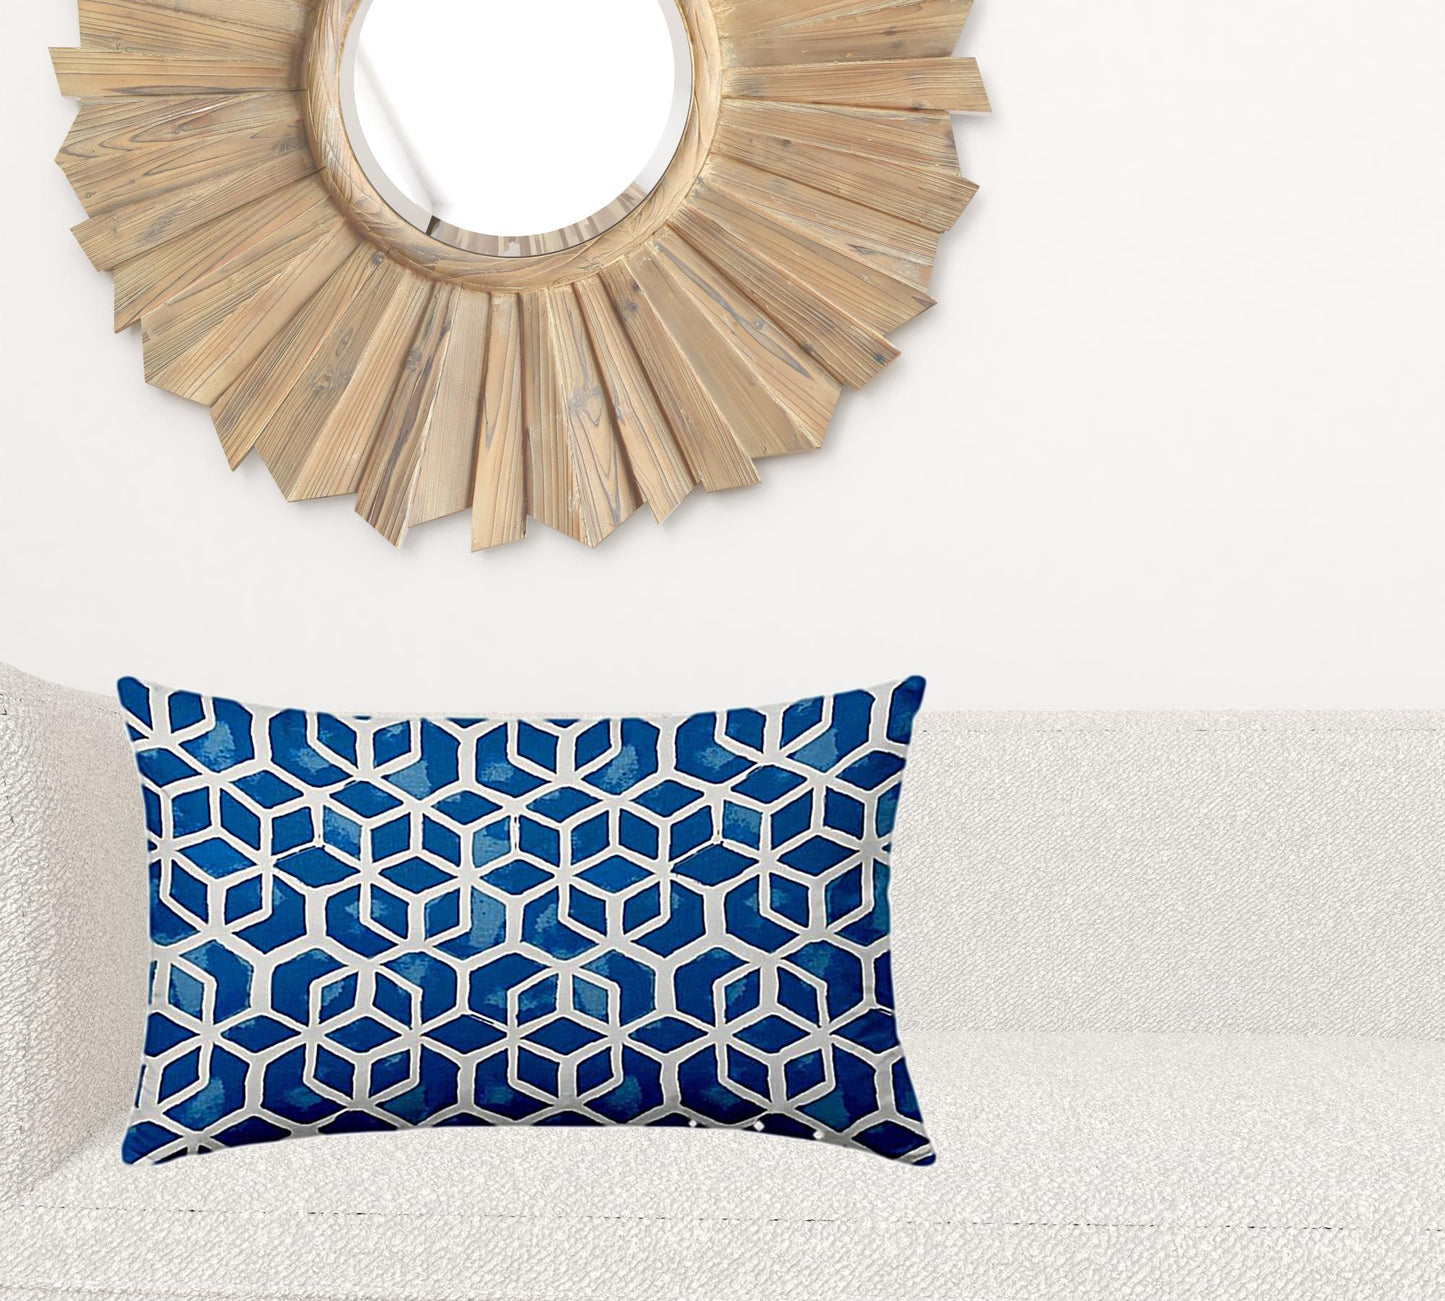 16" X 26" Blue And White Enveloped Geometric Lumbar Indoor Outdoor Pillow